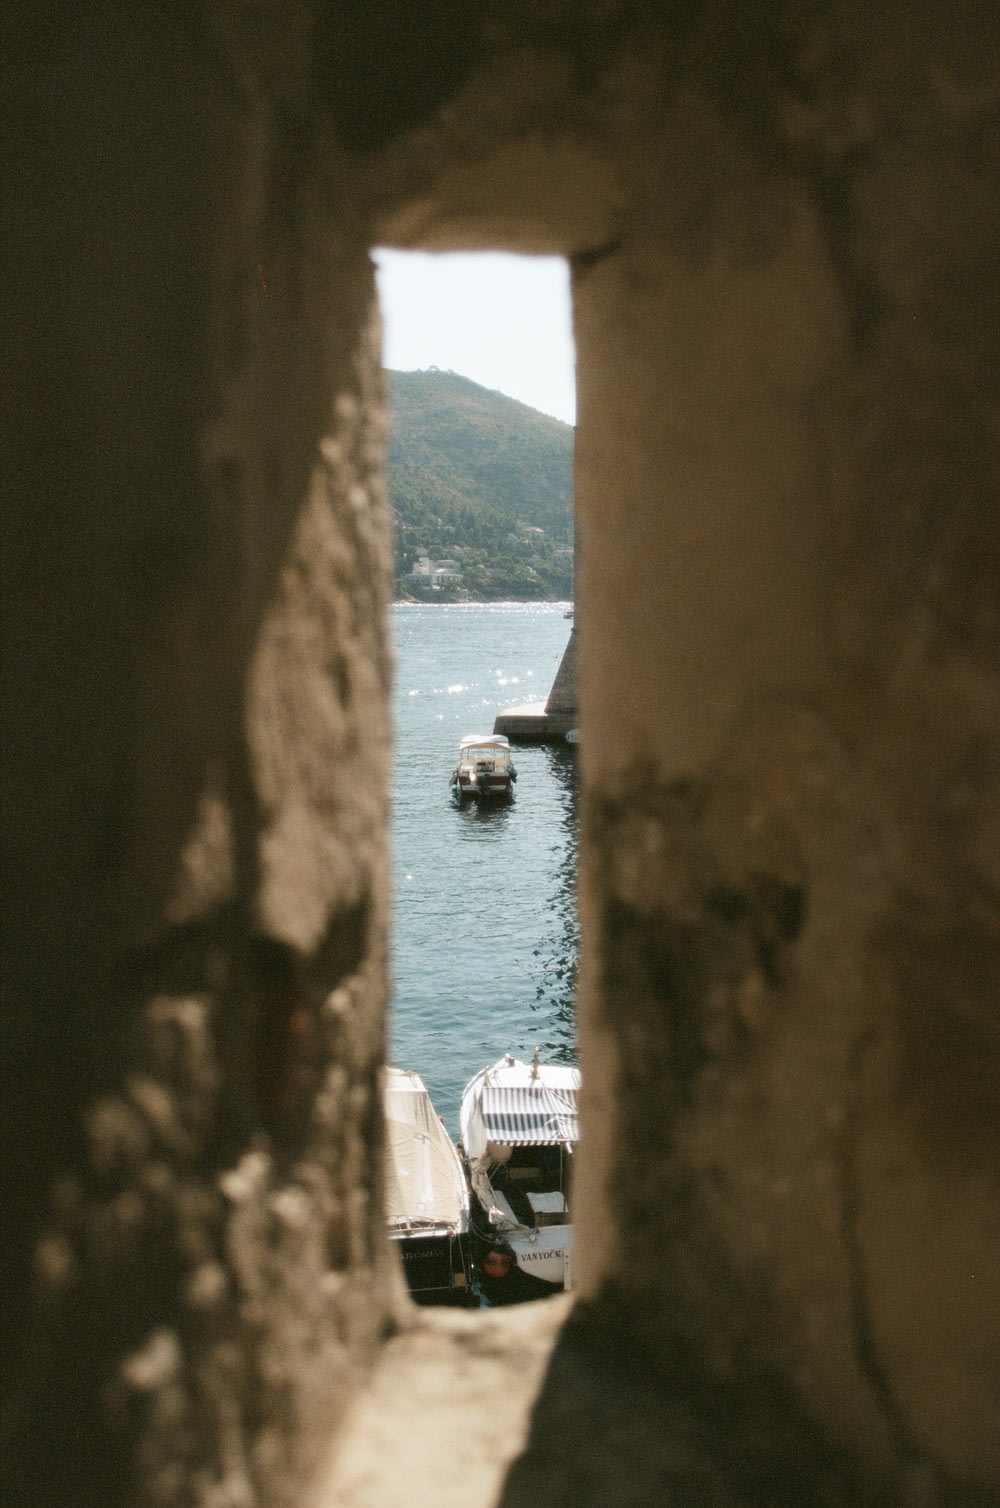 a view of a body of water through a hole in a wall